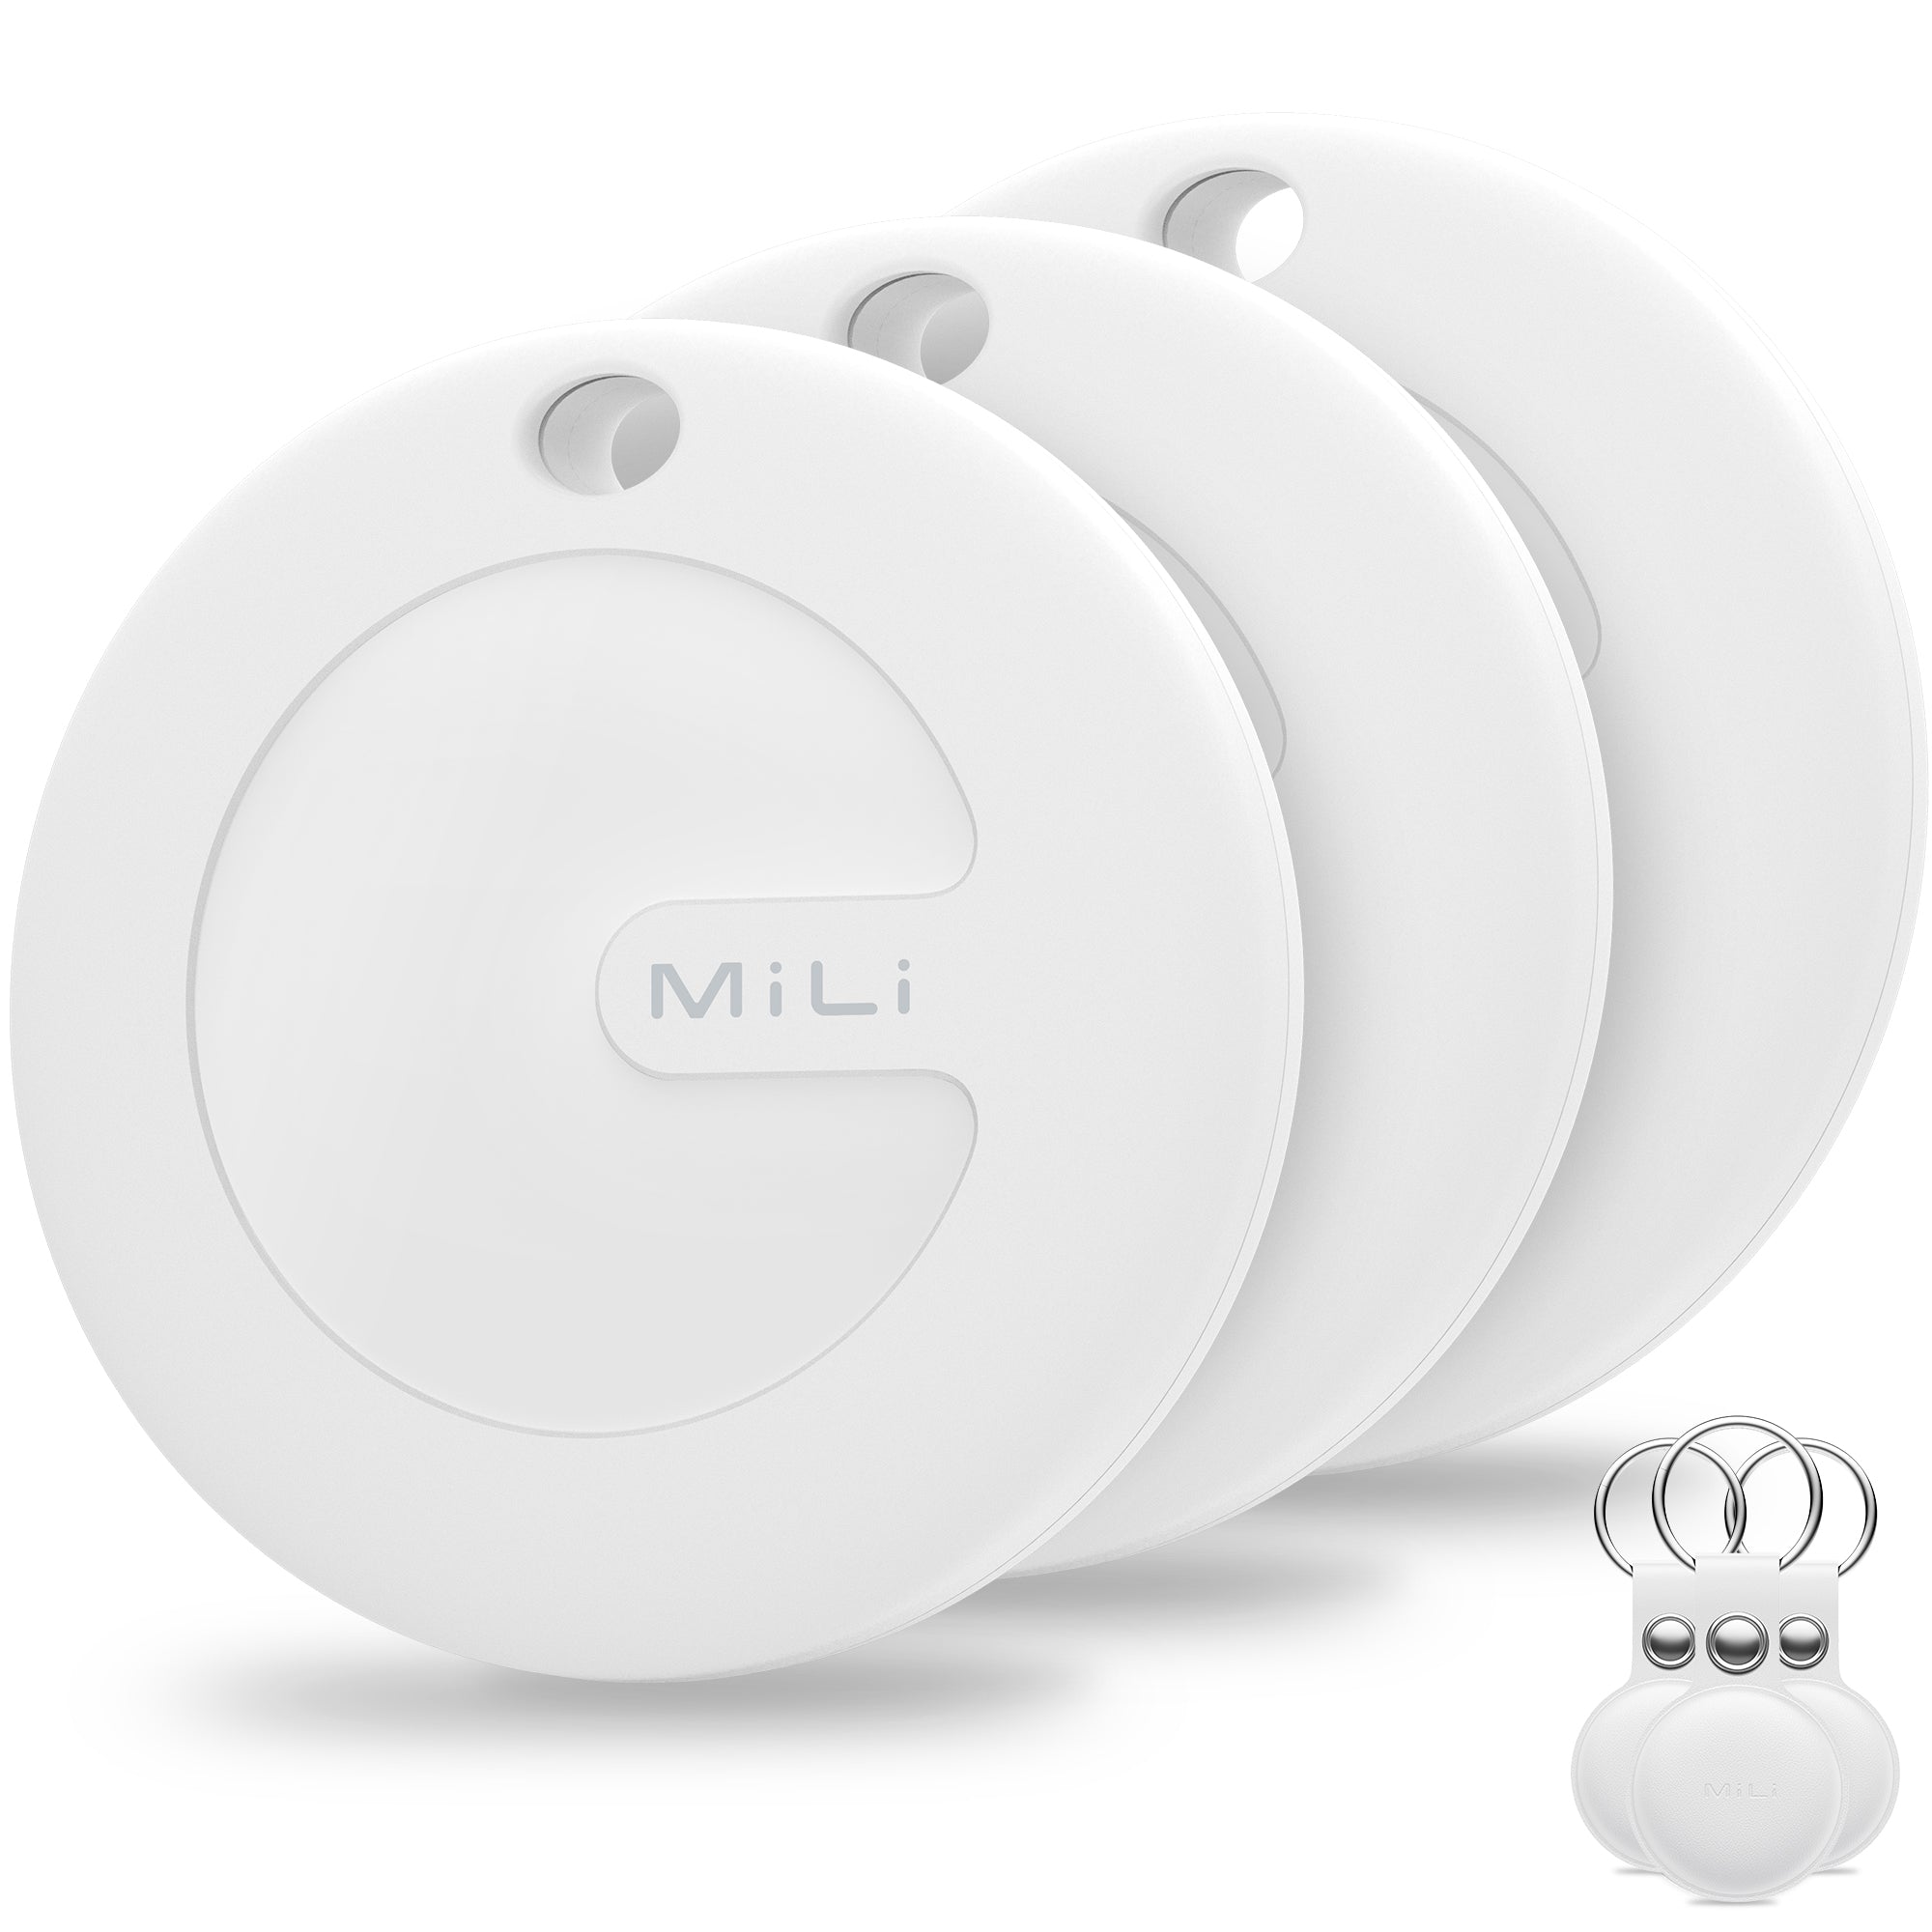 MiTag 1-Pack with Leather Case (White)